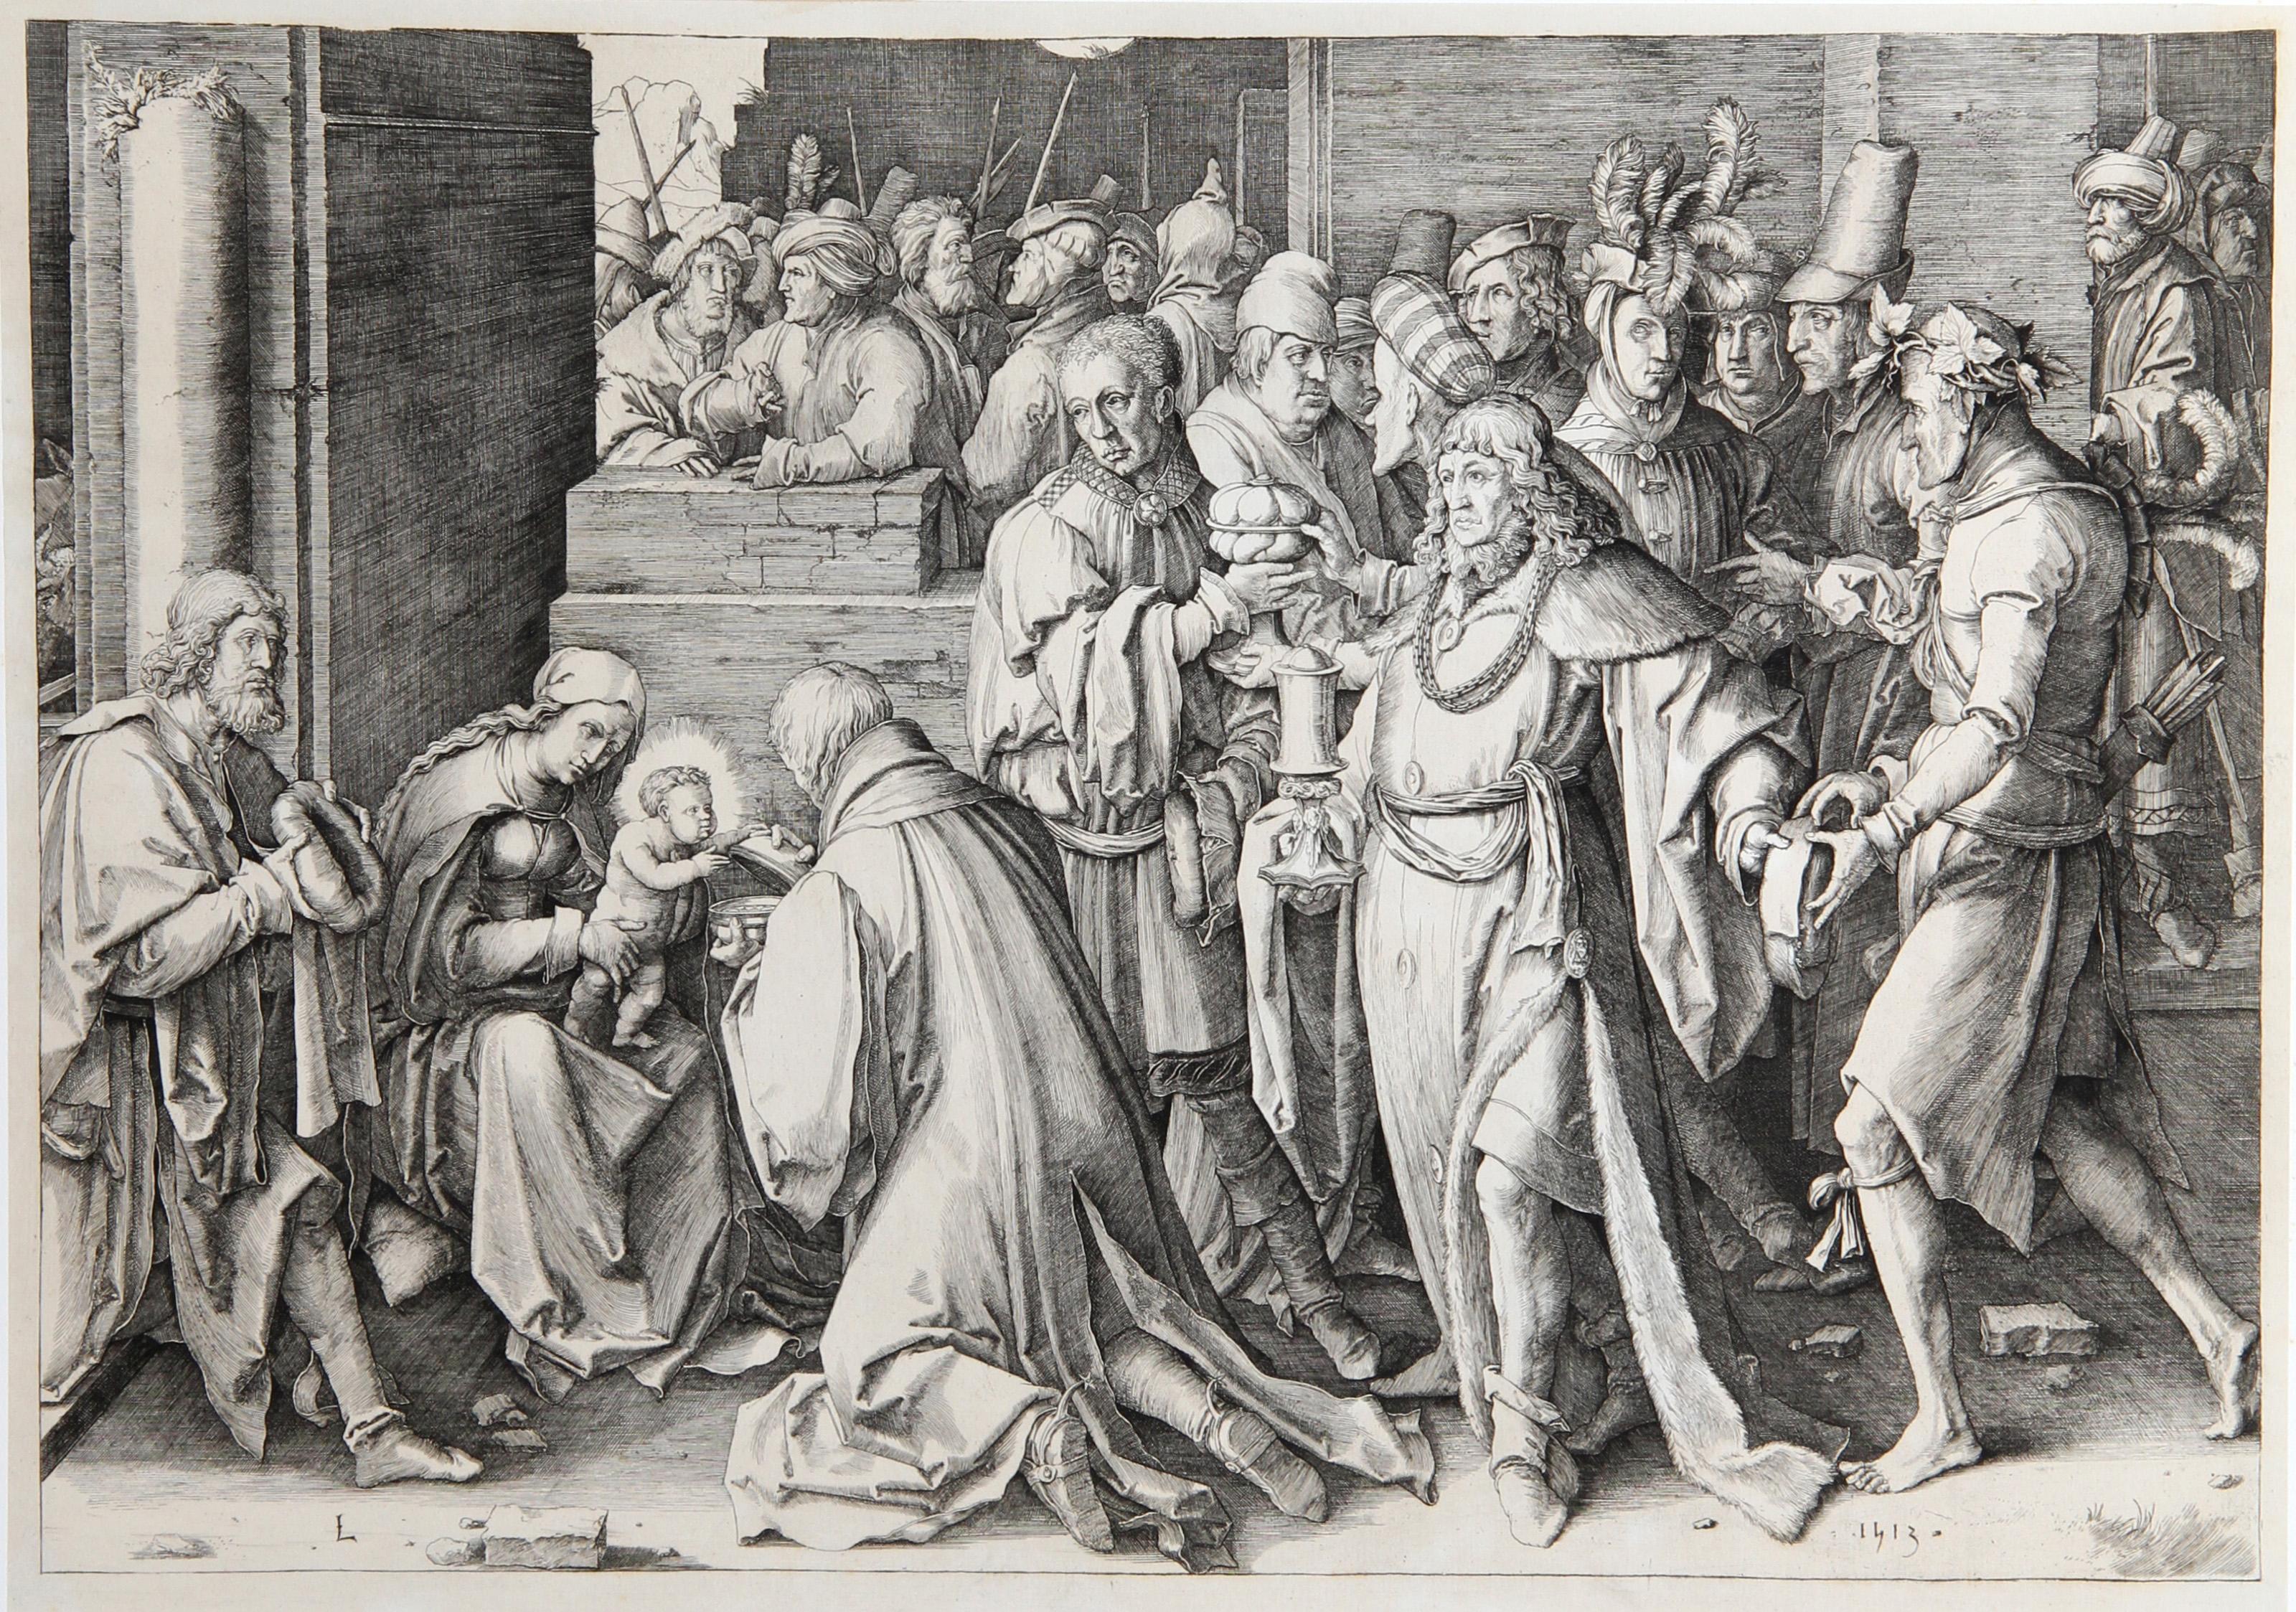 Artist: Lucas van Leyden, After by Amand Durand, Dutch (1494 - 1533) - l'Adoration des Mages, Year: 1873, Medium: Heliogravure, Size: 12.75  x 17.5 in. (32.39  x 44.45 cm), Printer: Amand Durand, Description: French Engraver and painter Charles